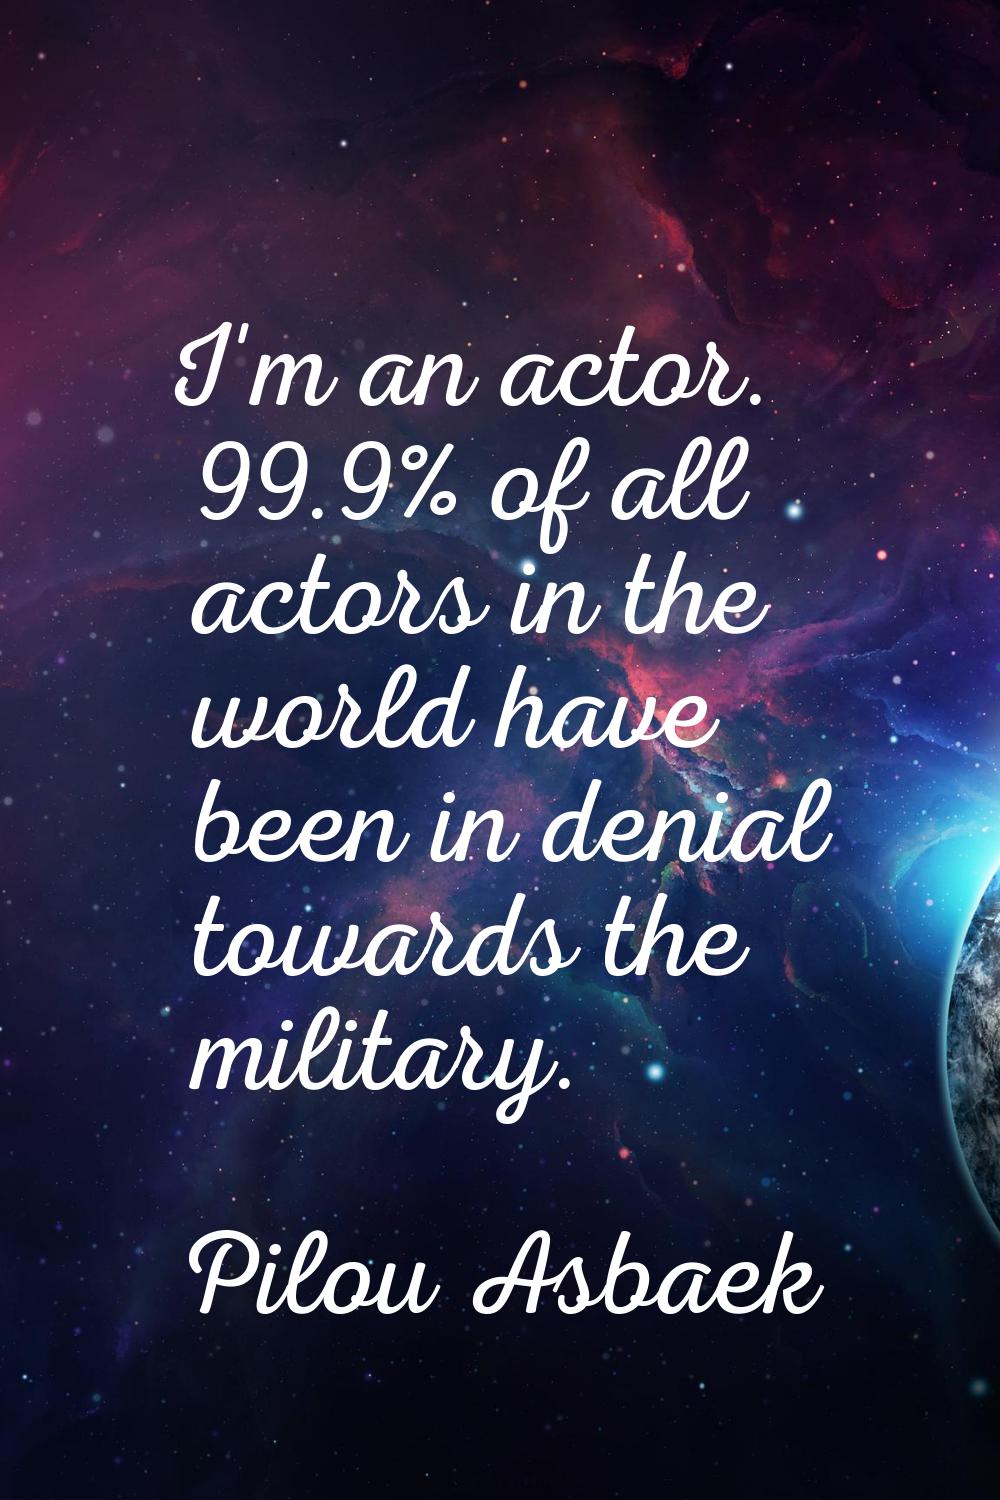 I'm an actor. 99.9% of all actors in the world have been in denial towards the military.